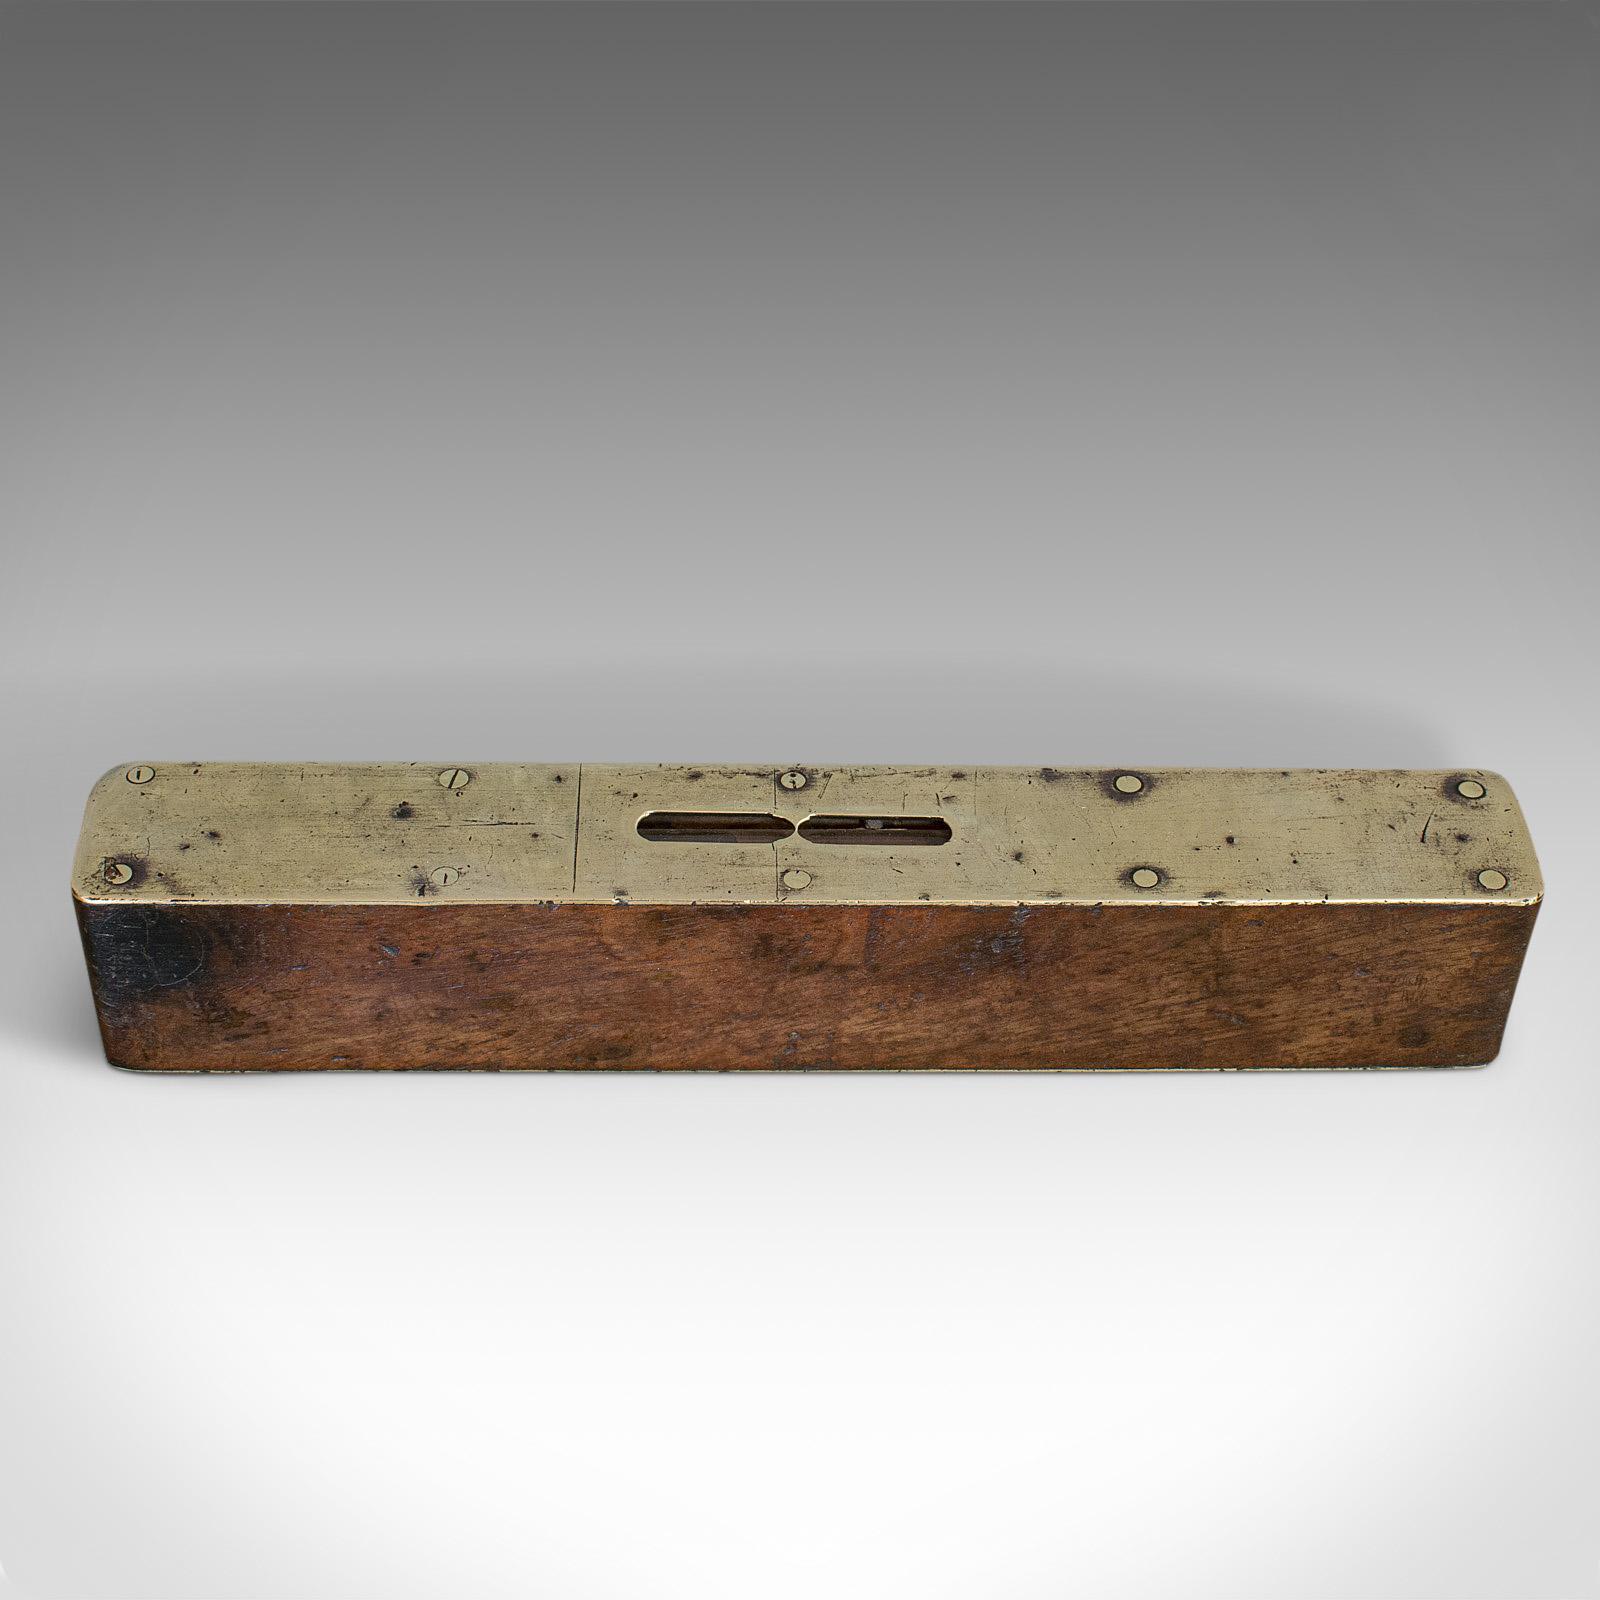 This is a vintage spirit level. An English, Rosewood and craftsman's instrument, dating to the mid-20th century, circa 1950.

Period appeal with quality finish
Displays a desirable aged patina
Body in rosewood shows fine grain interest
Brass